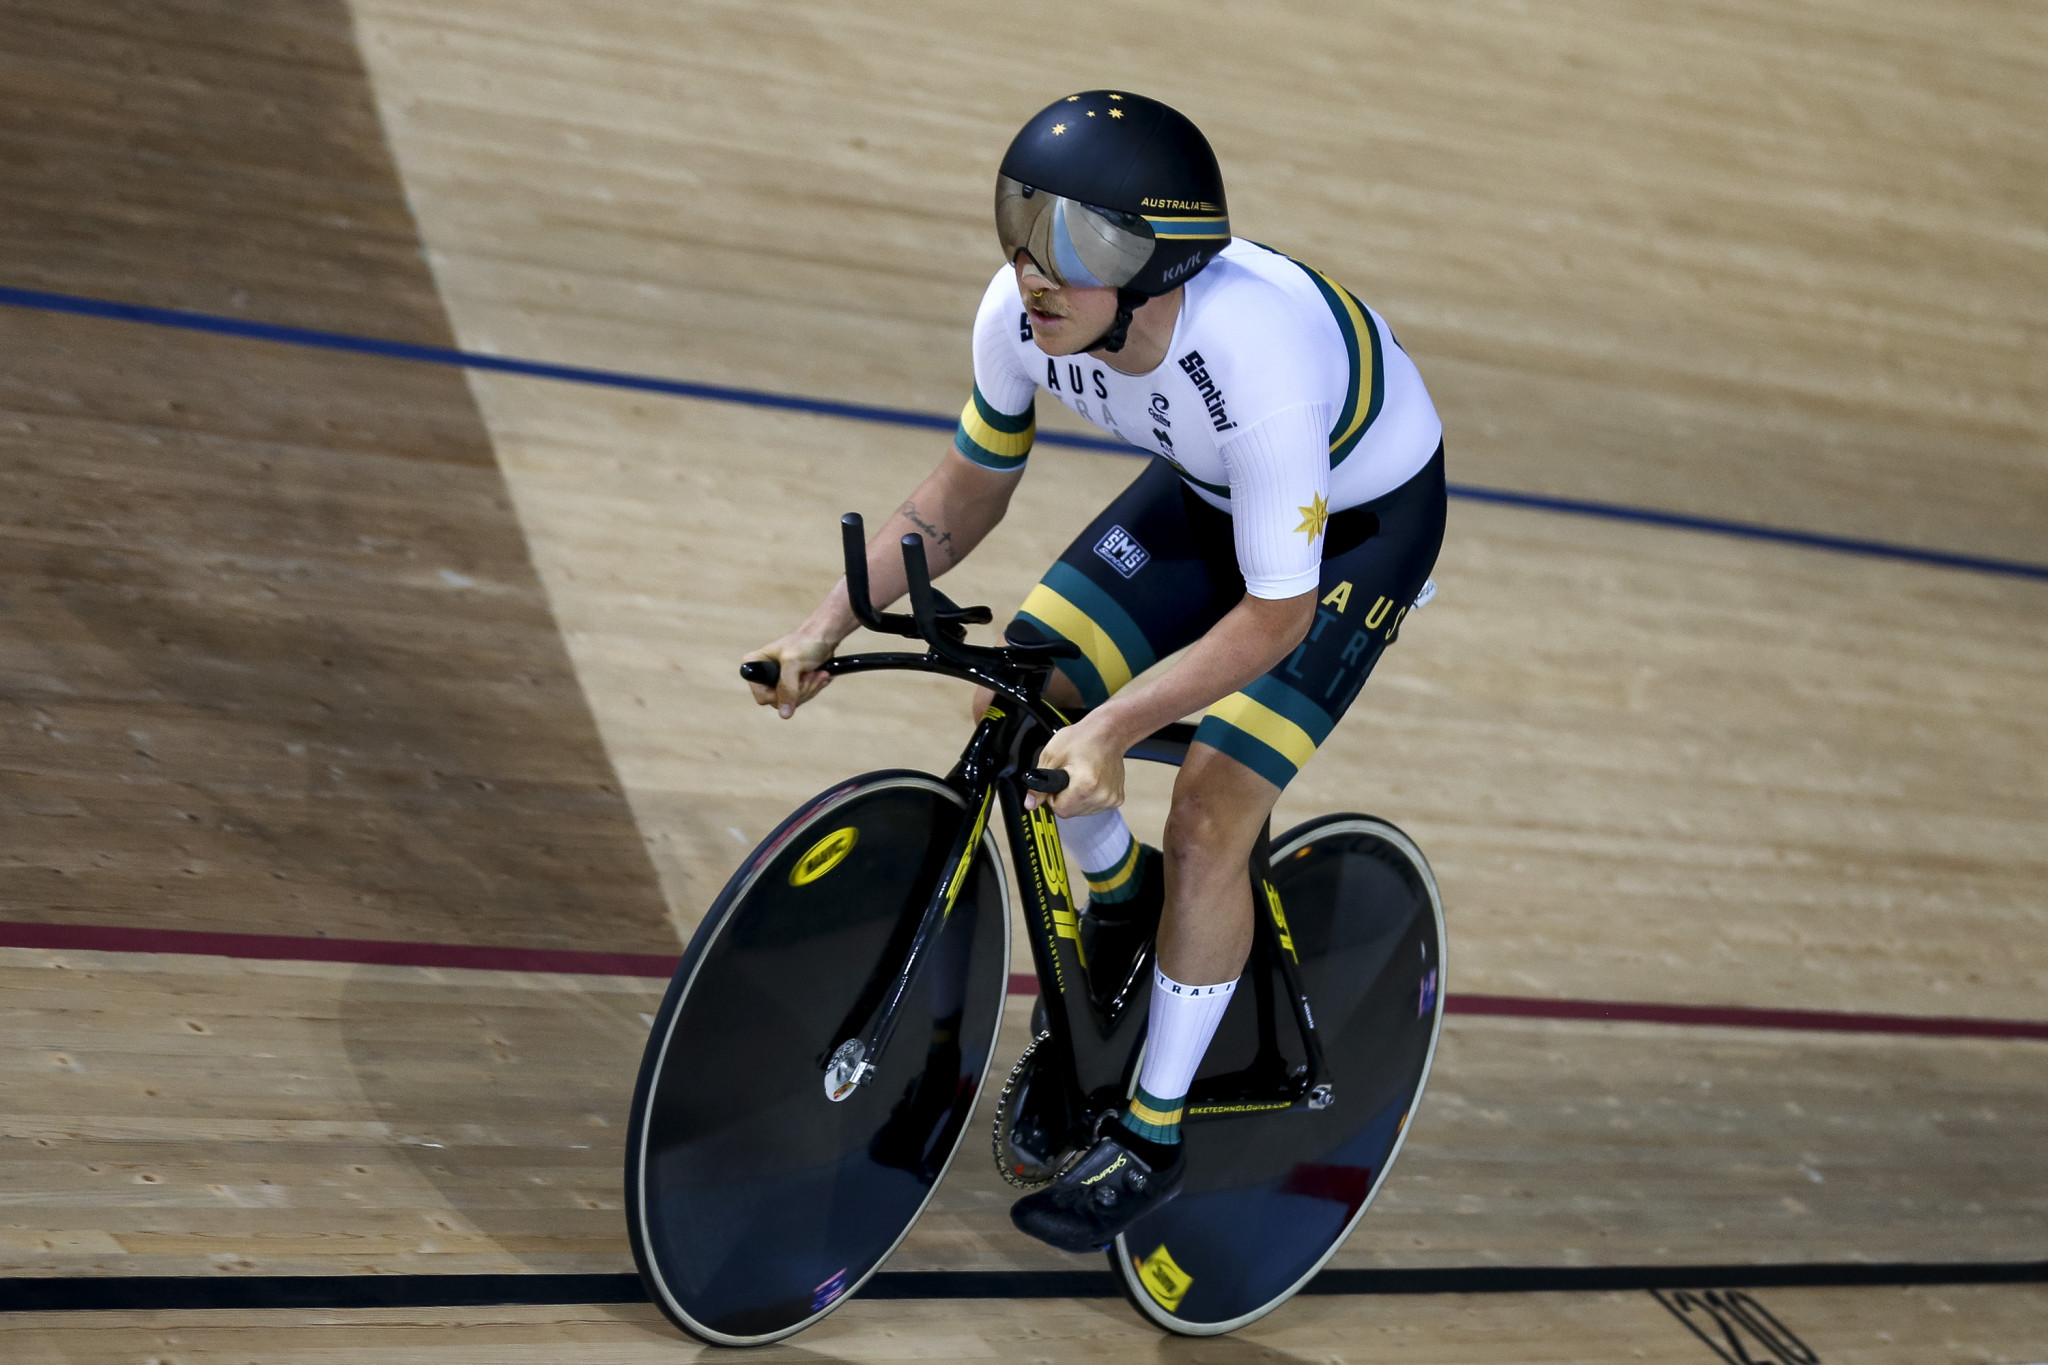 Alistair Donohoe will be among the Australian gold medallists seeking to defend titles at the UCI Para Cycling Track World Championships in Canada next year ©Getty Images